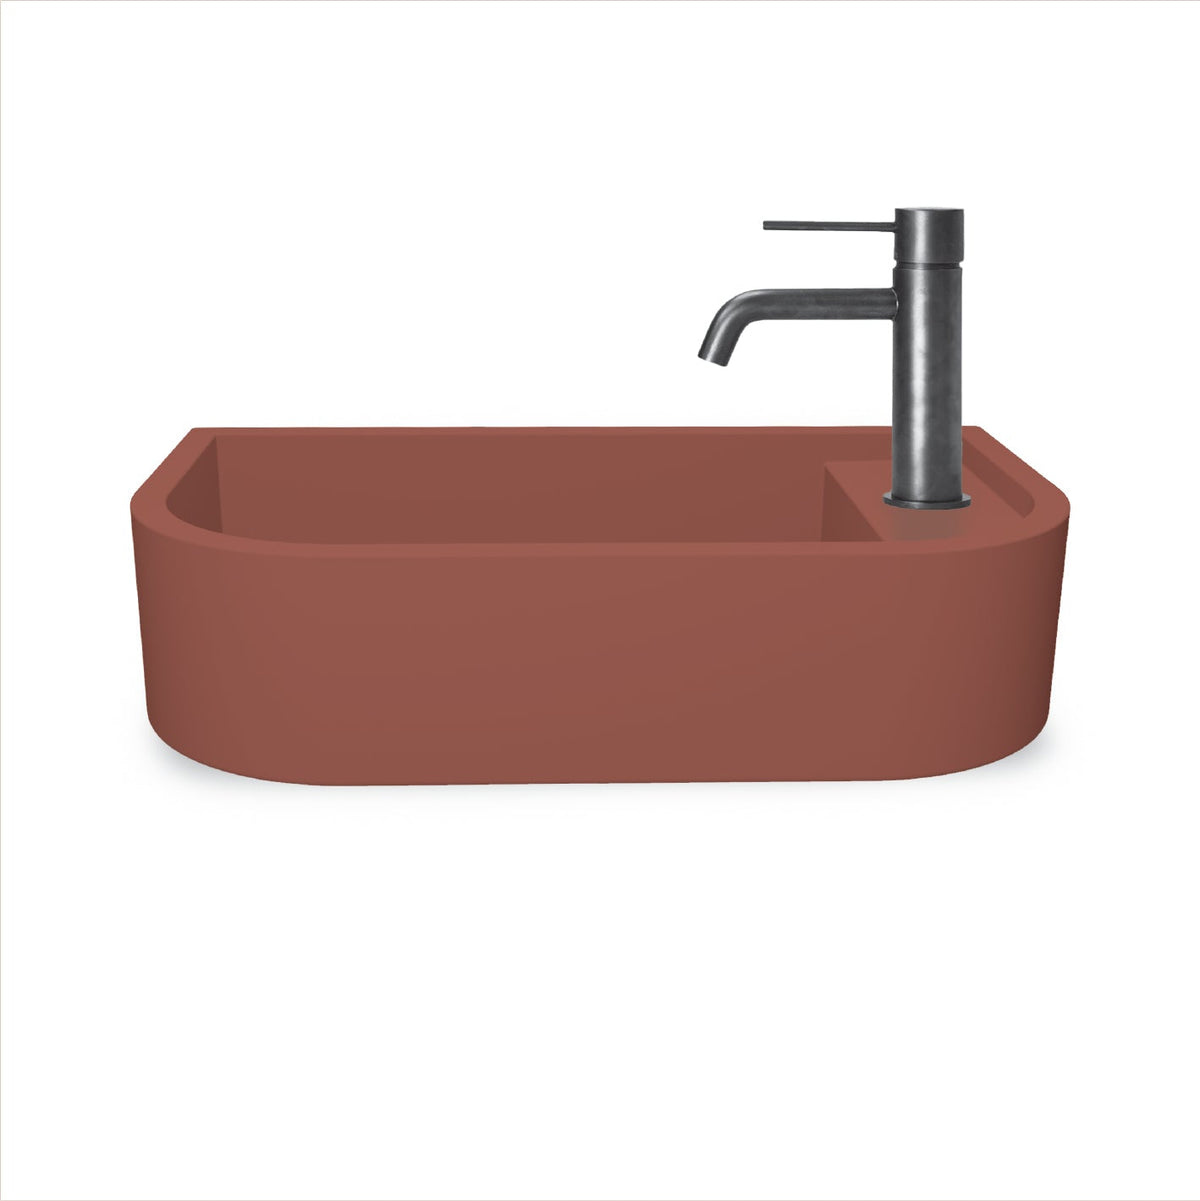 Loop 02 Basin - Overflow - Wall Hung (Musk,Tap Hole,Brass)